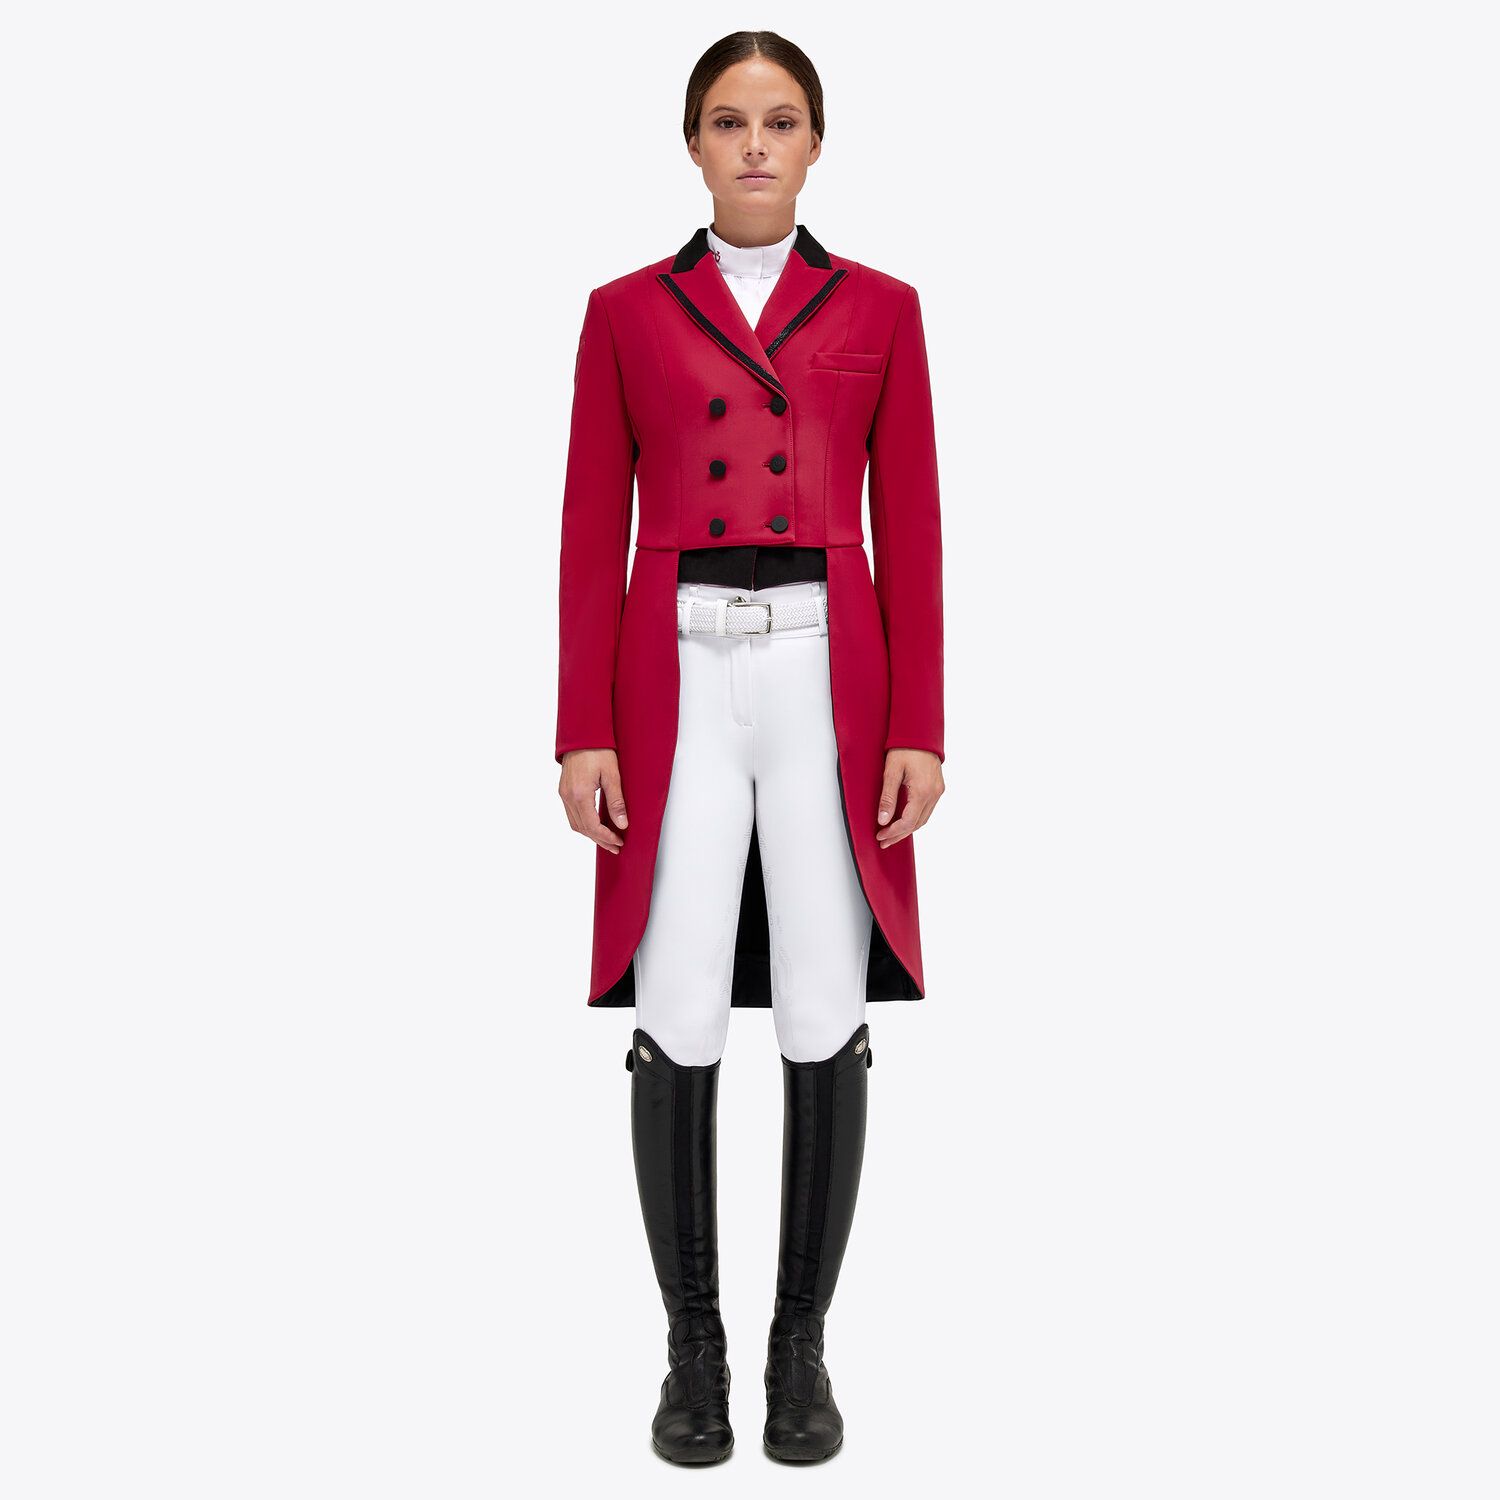 Cavalleria Toscana Women's tailcoat with covered b ROSE-7